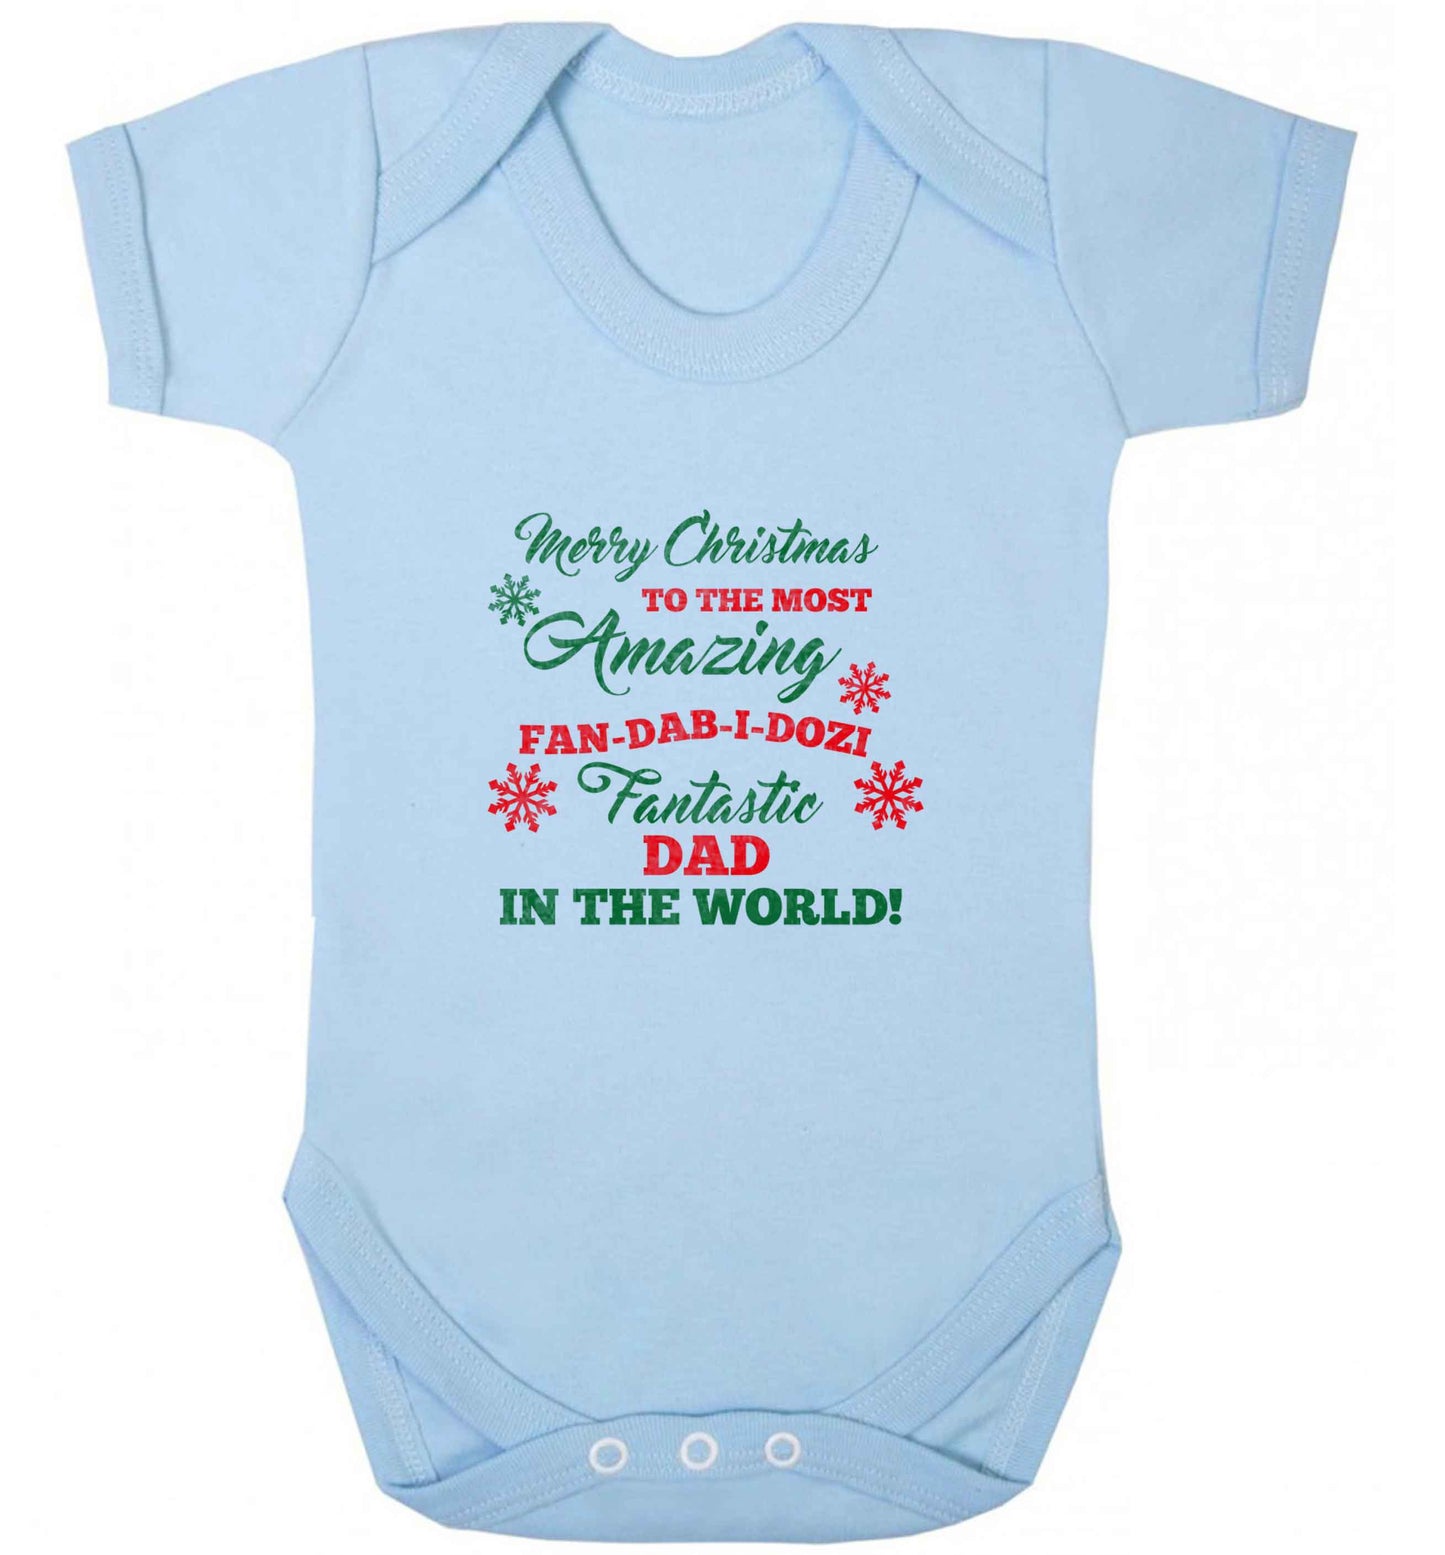 Merry Christmas to the most amazing fan-dab-i-dozi fantasic Dad in the world baby vest pale blue 18-24 months